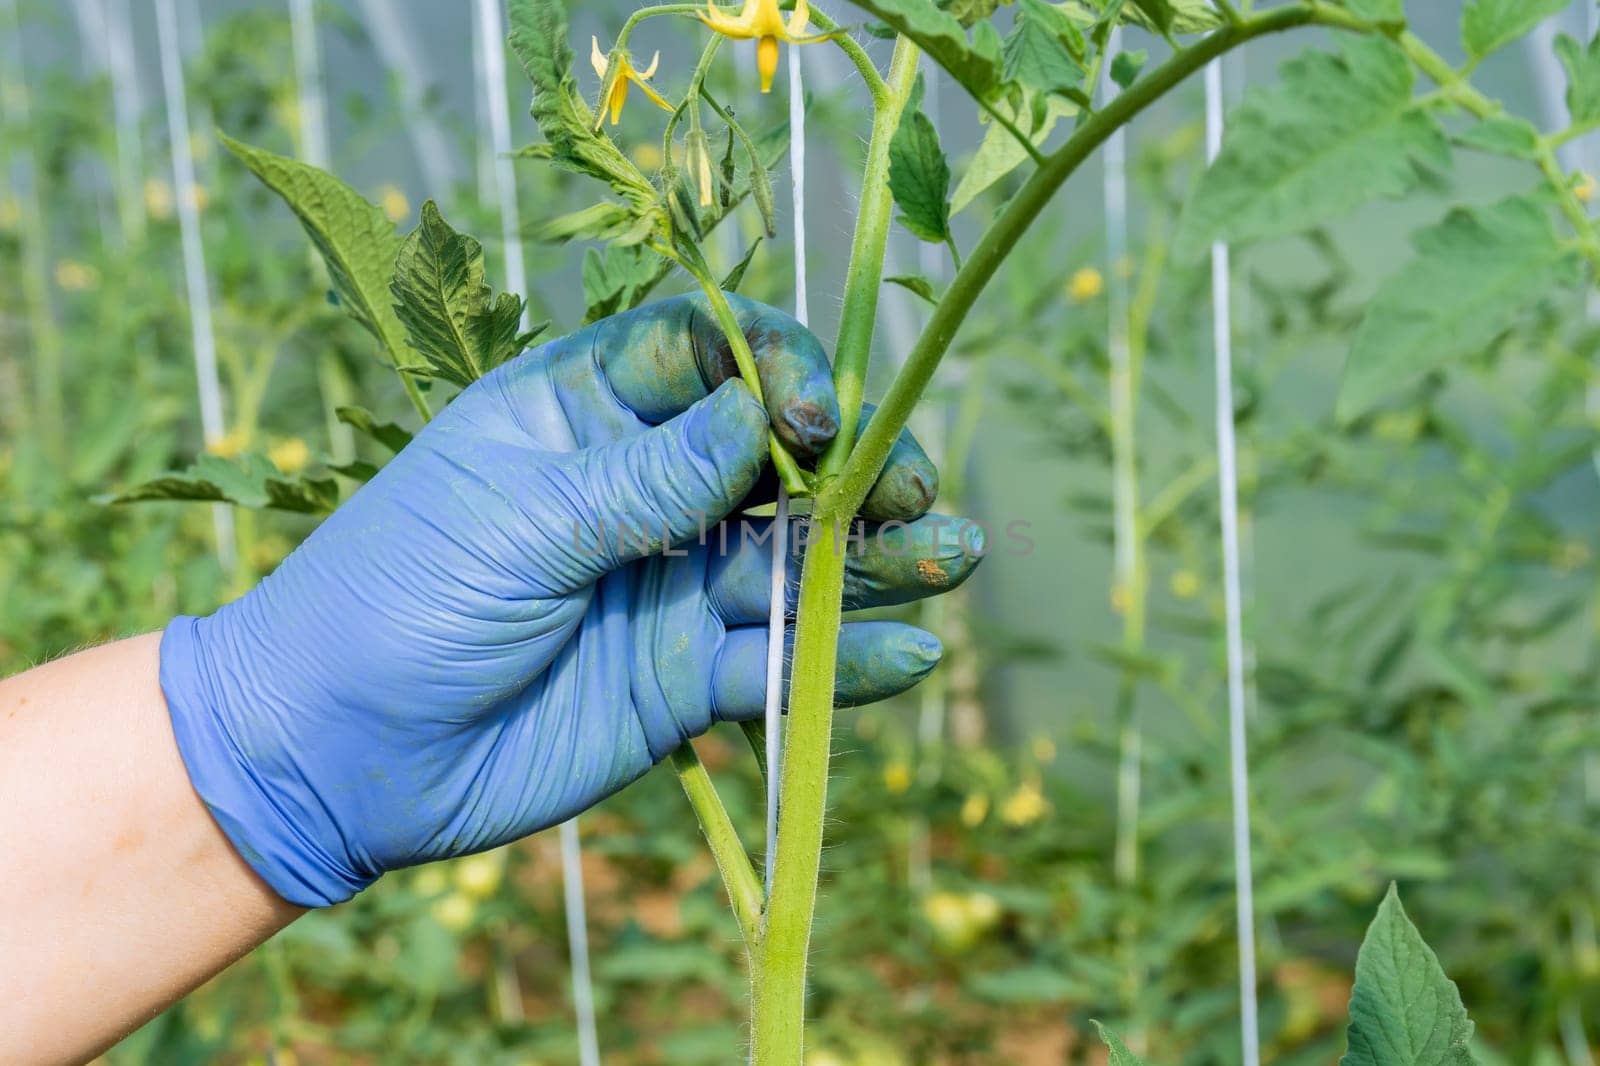 Removing tomato side shoots encourages plant to direct more energy towards fruit production. by Yaroslav